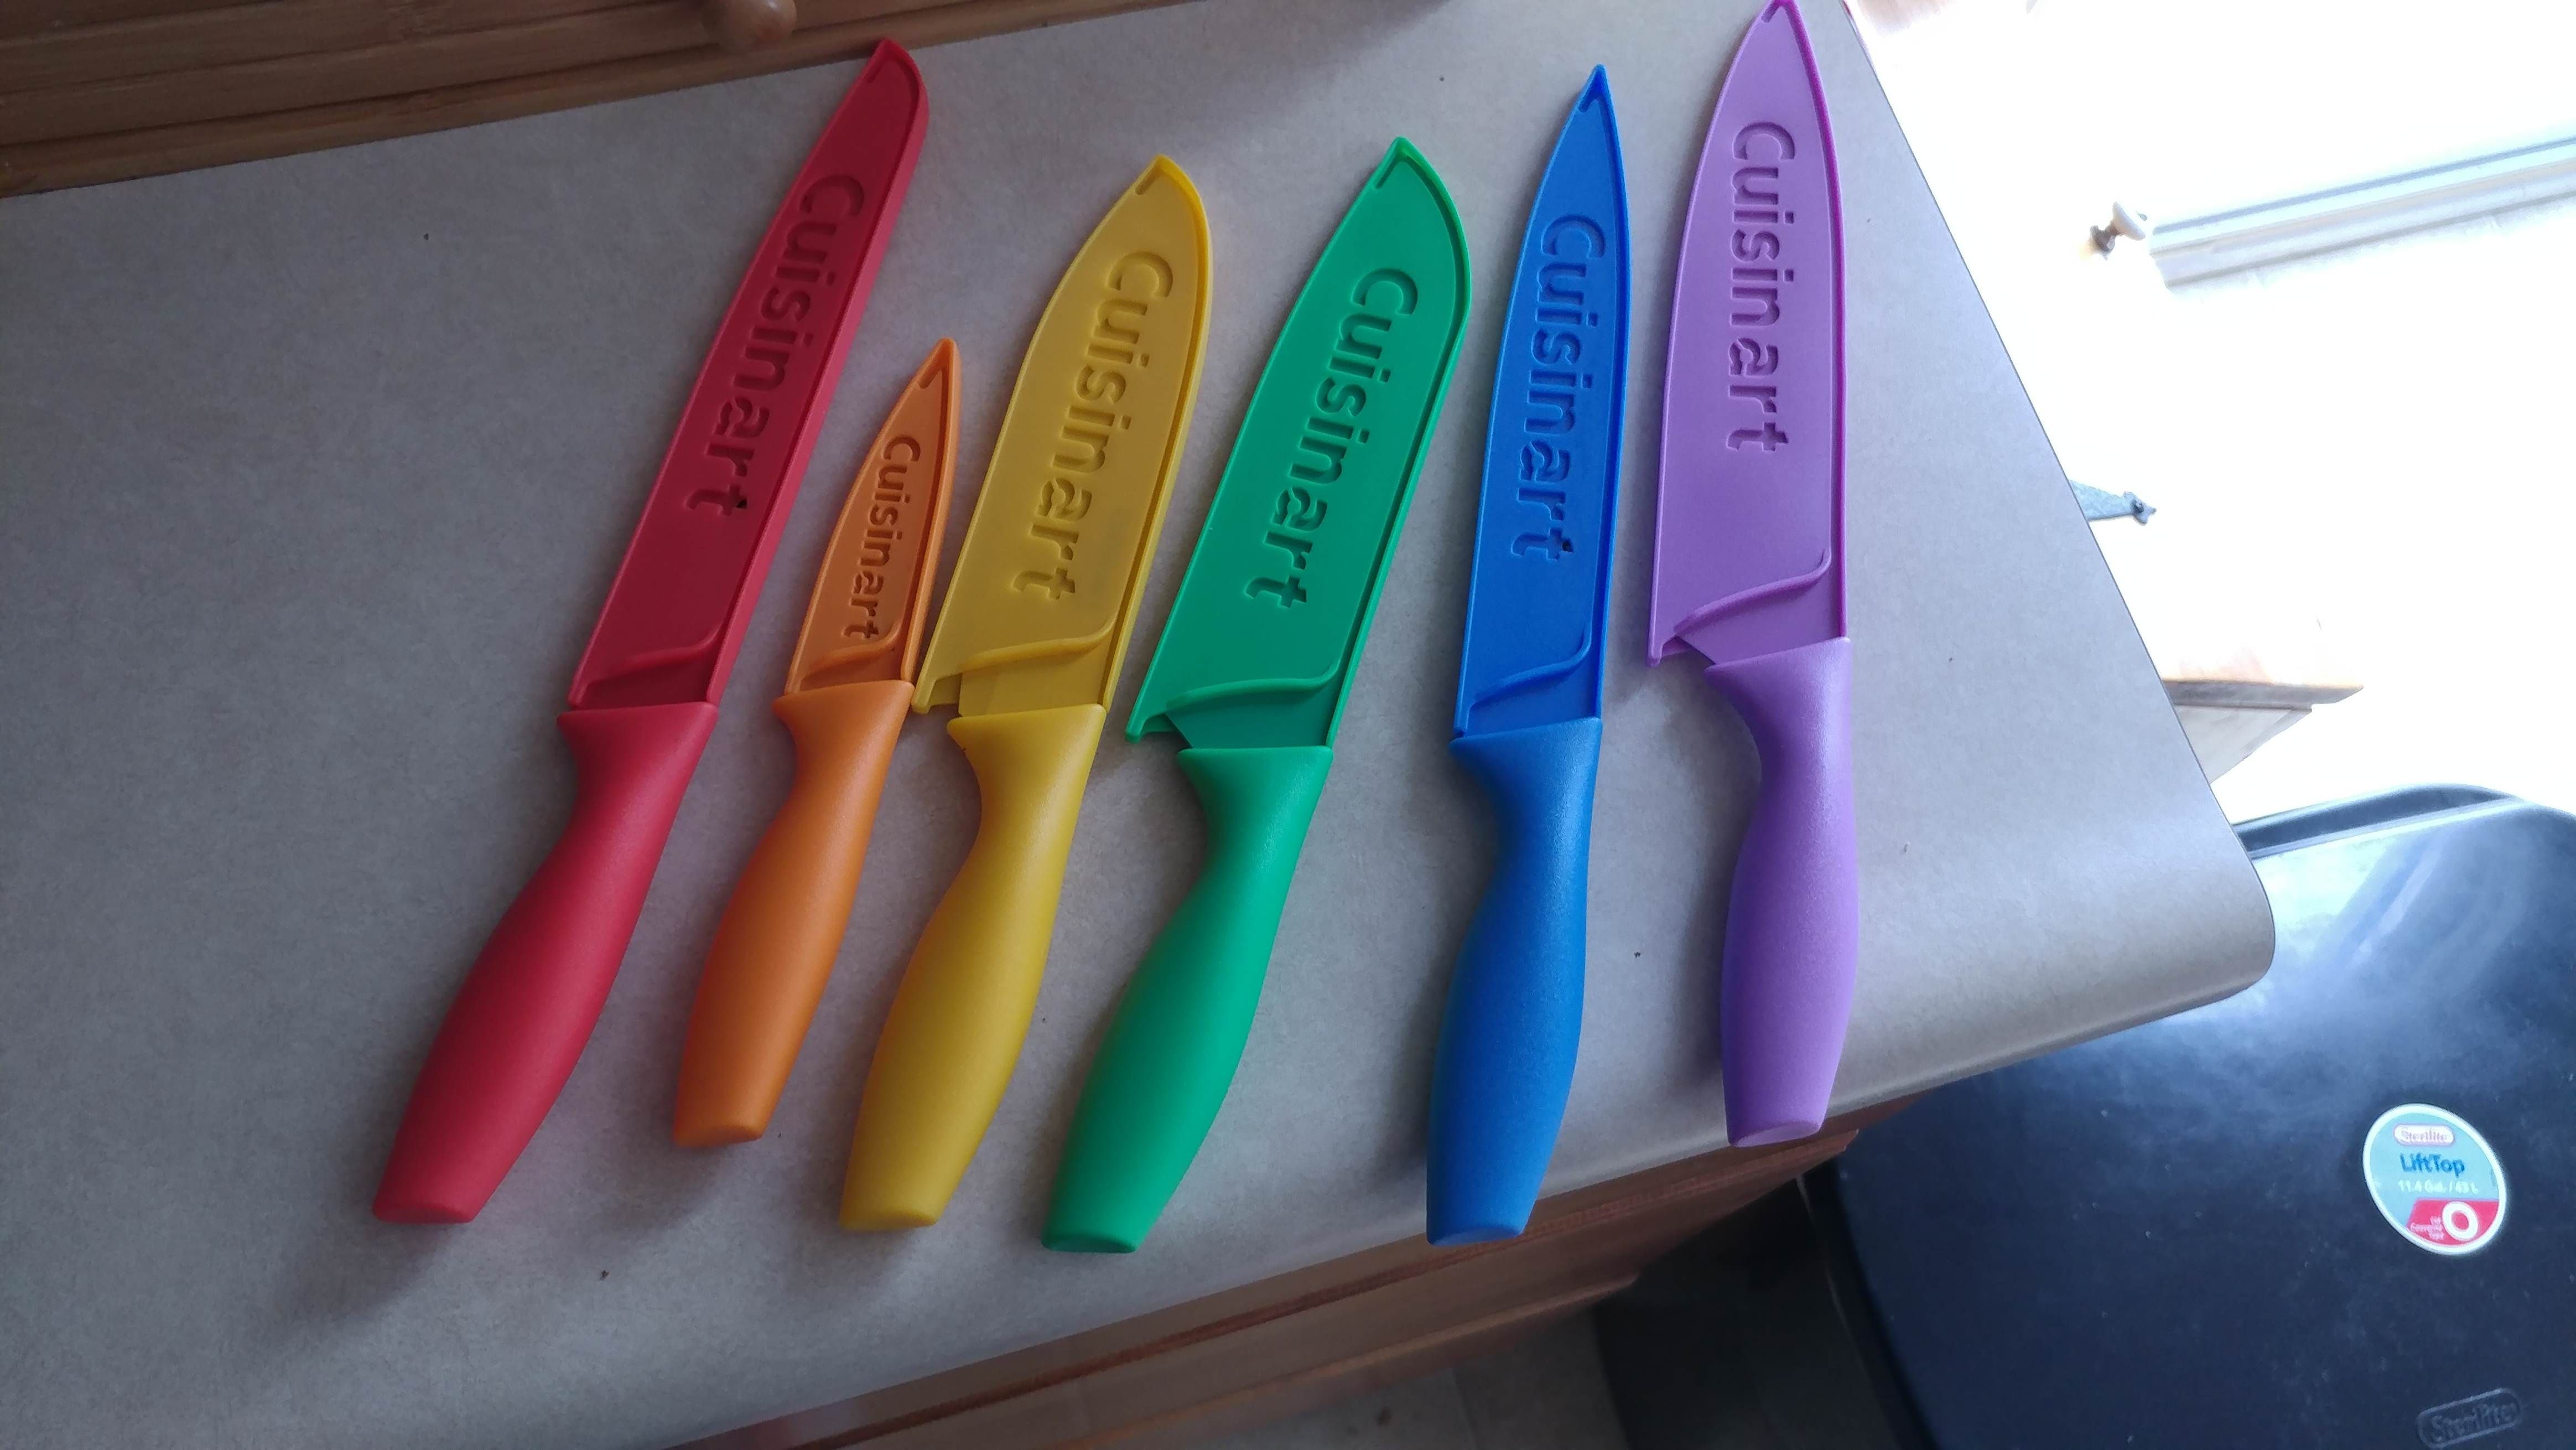 Gift from the in-laws: Kitchen knives that look like baby toys. We have a toddler.